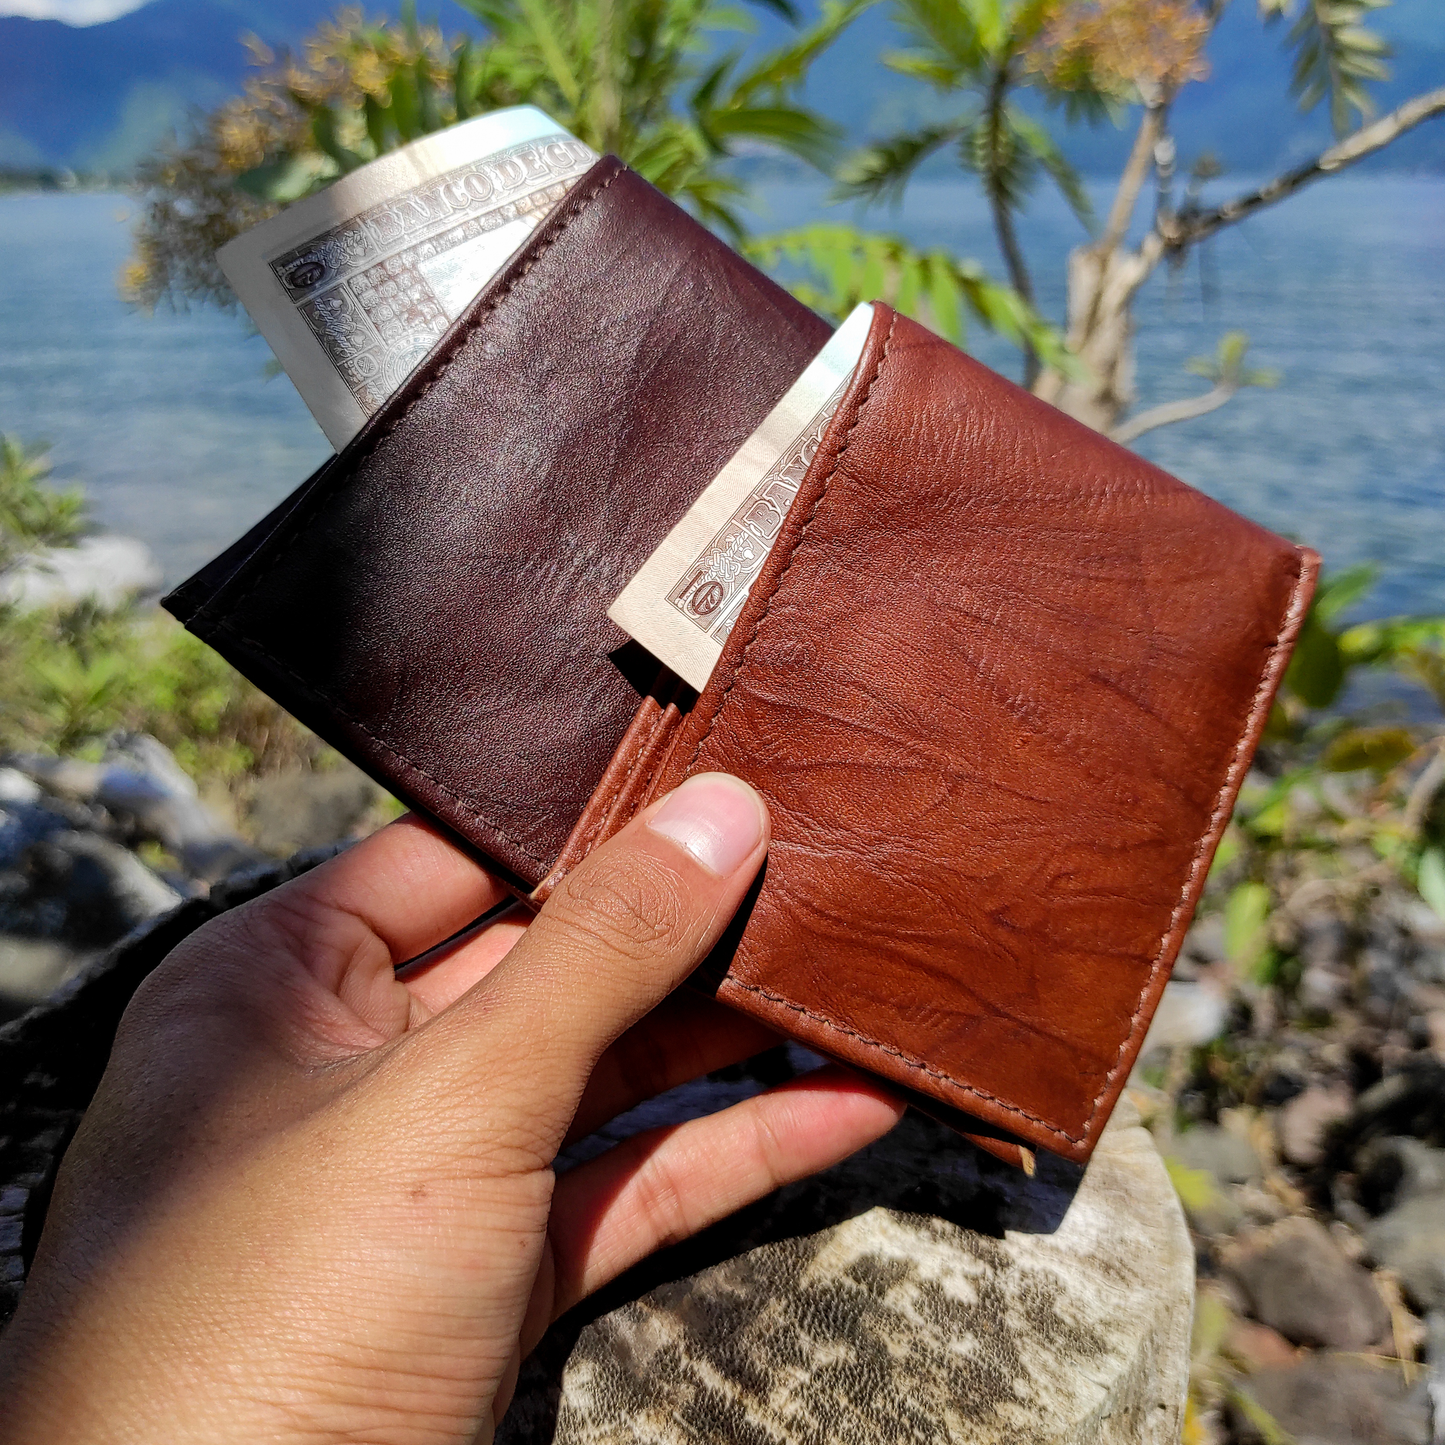 The Trifold Wallet